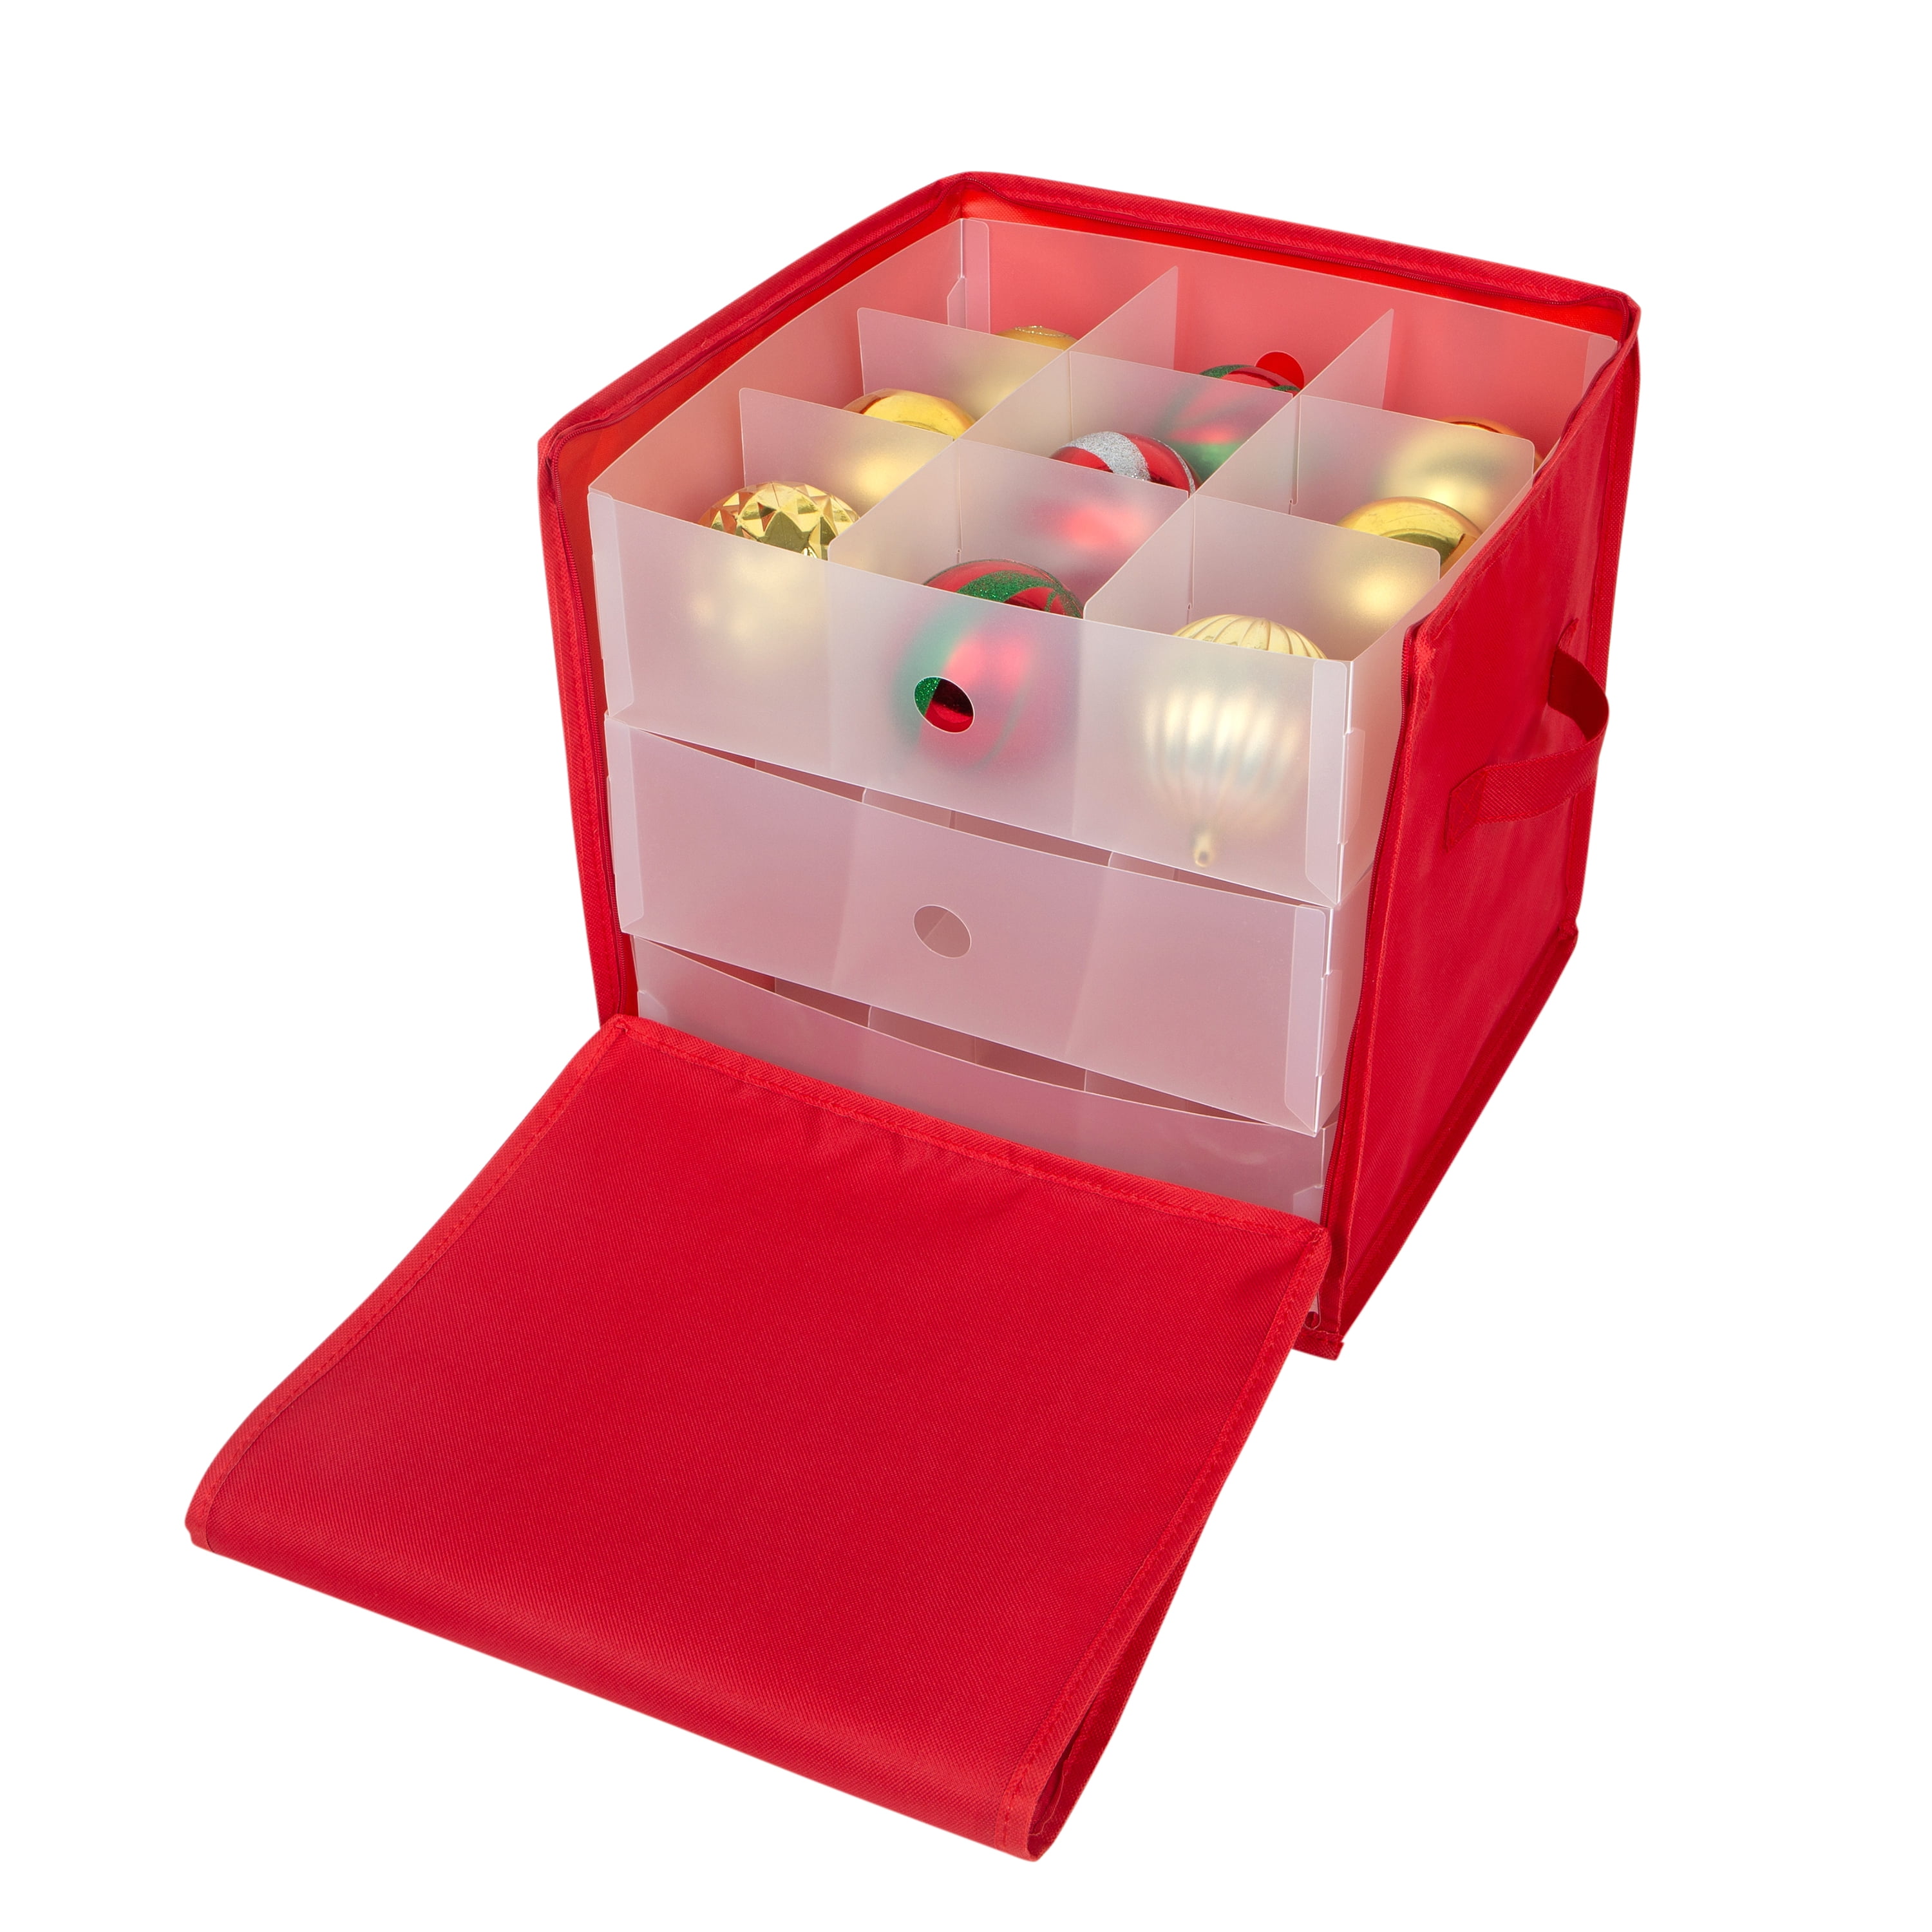 Christmas Ornament Storage Box with Adjustable Acid-Free Dividers